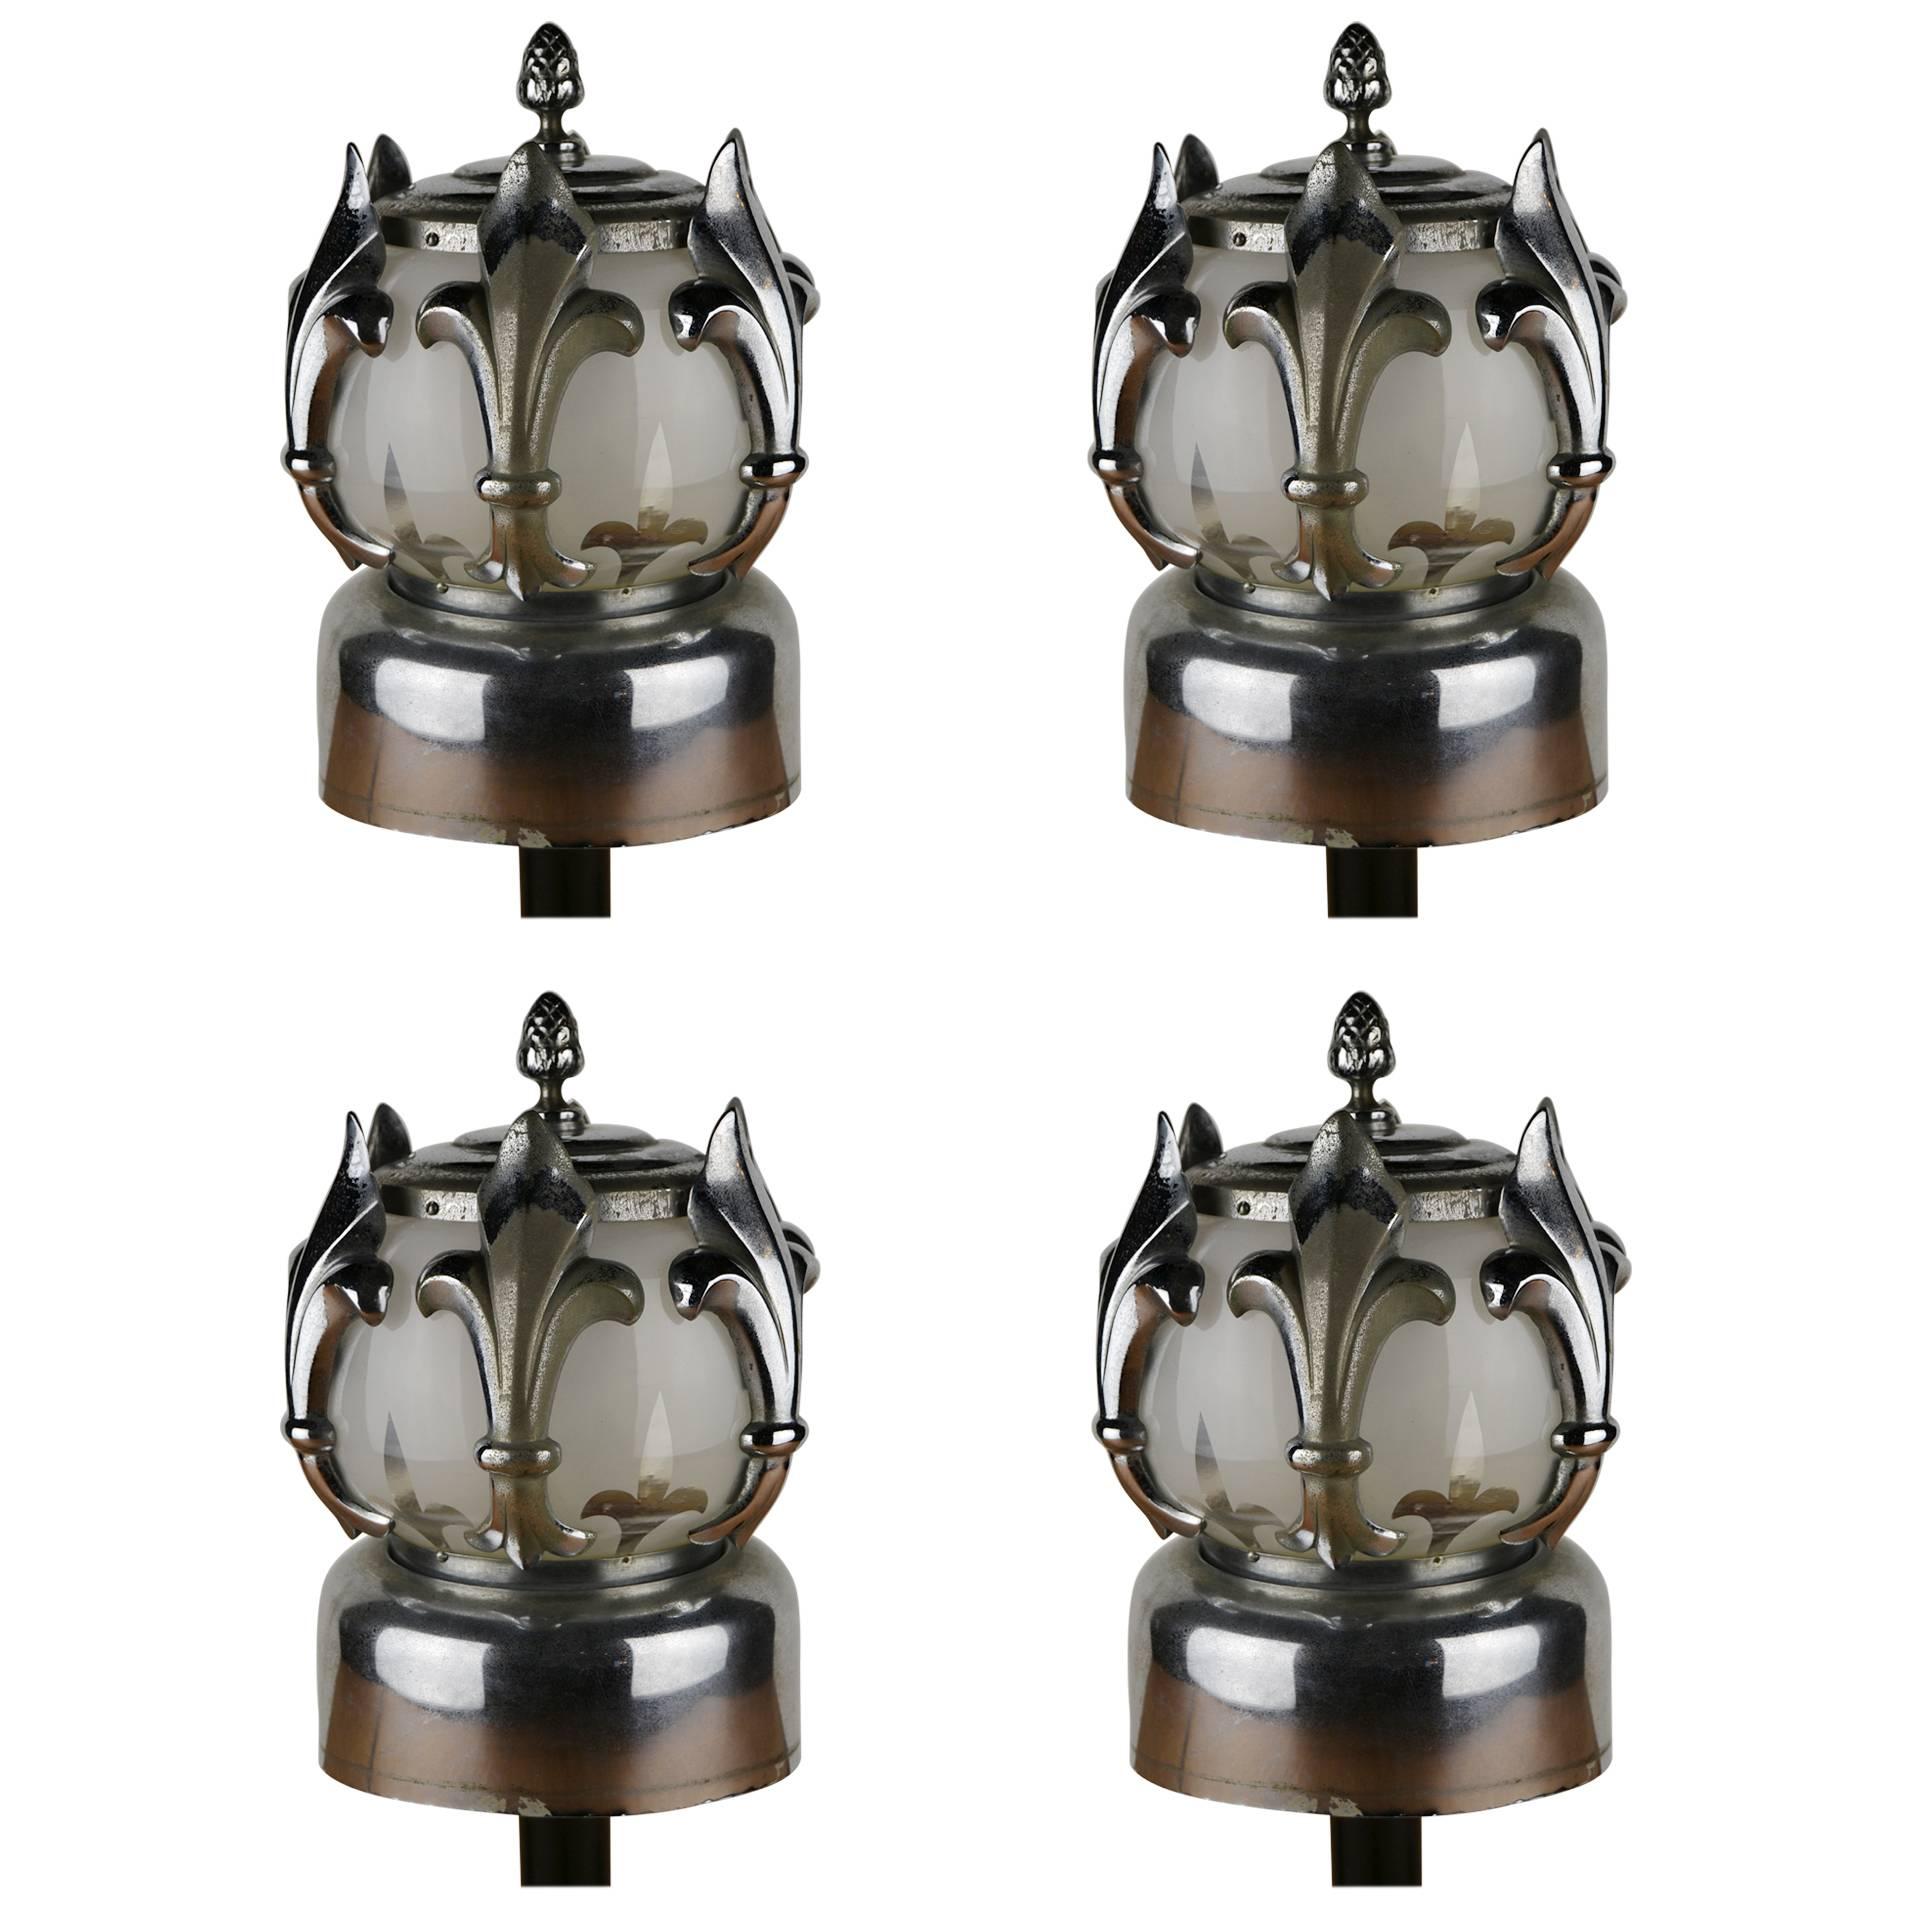 Four Art Deco Lamps from Hearse / Funeral Car